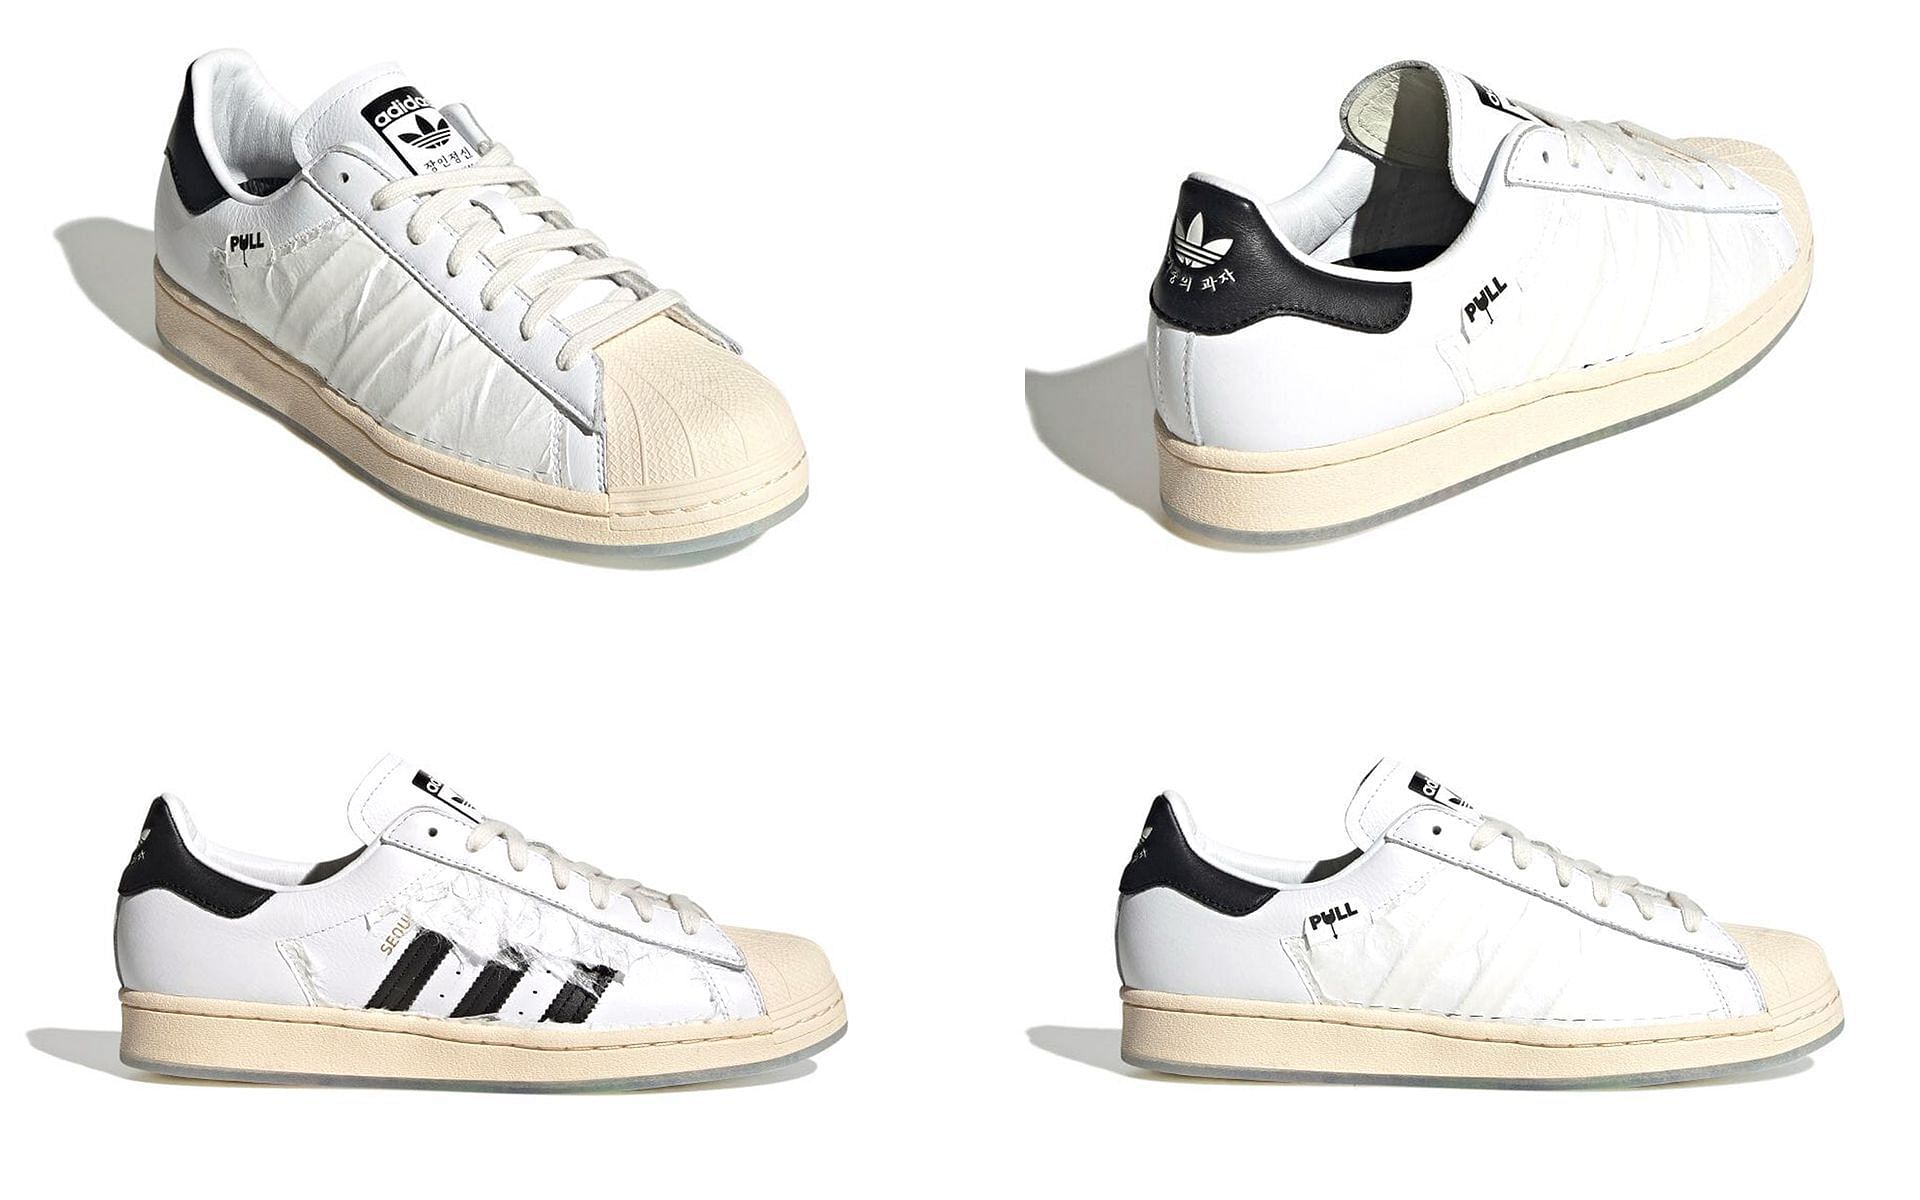 Where to buy Taegeukdang x Adidas Superstar? Price, release date, and ...